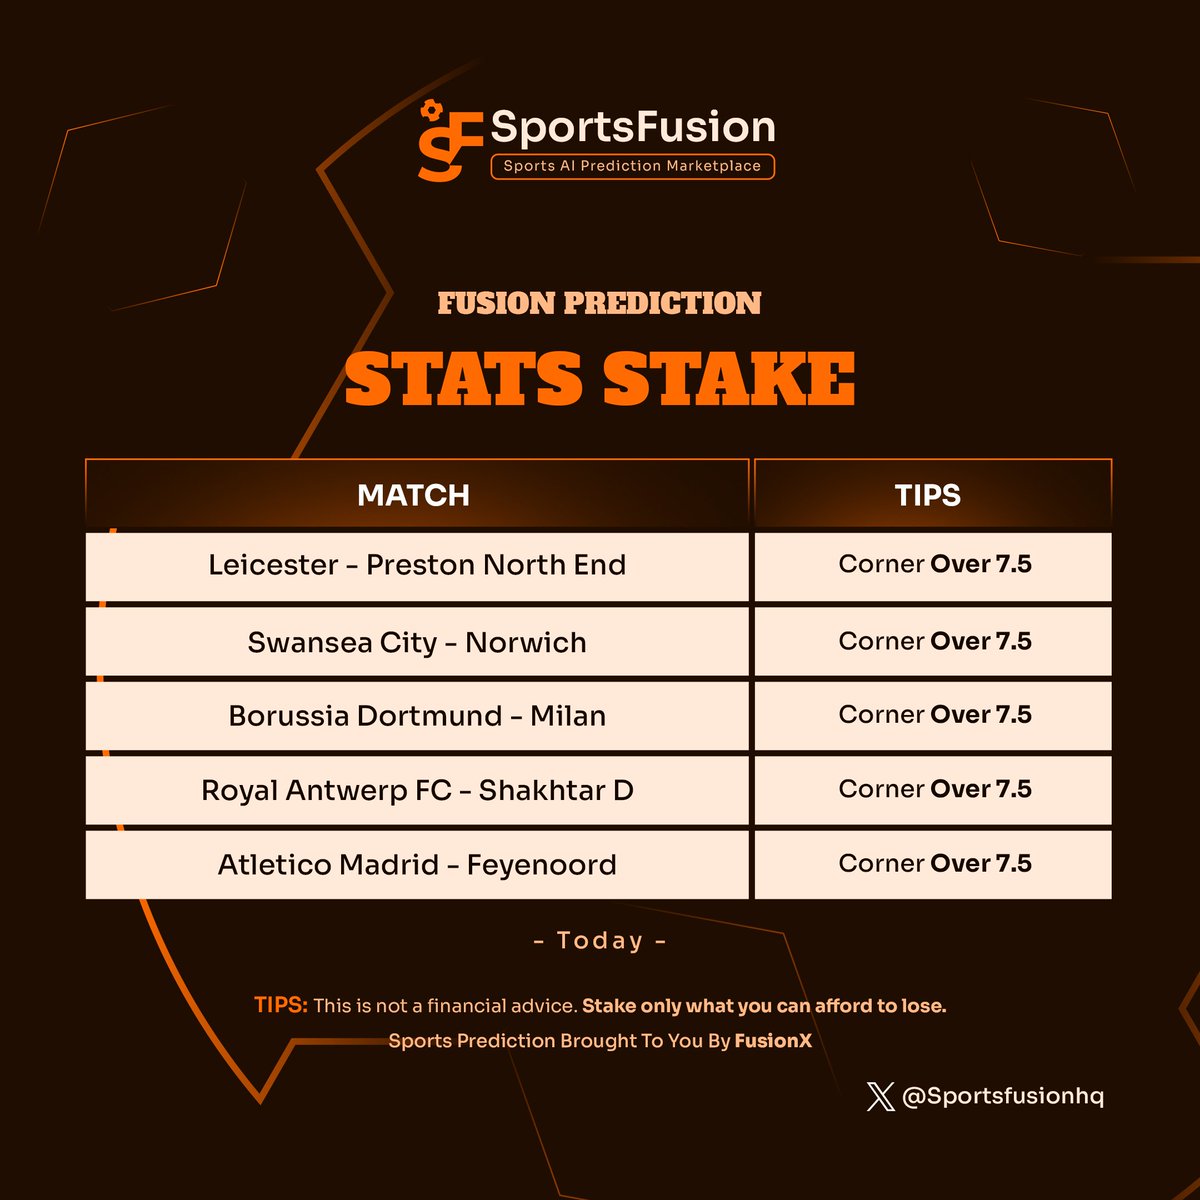 Here we go 🔥 😊 

Today's recommended stake 

#Fusion prediction ⚽️⚽️

3 Odd (Corner)💥💥

Sportybet Code ➡️  5113B0

Why don't you have a Sportybet Account ❓️

Register here now❗️
bit.ly/3reSkRh

Goodluck🔥

OlaofLagos | ManUtd | #NapoliRealMadrid #ChampionsLeague…